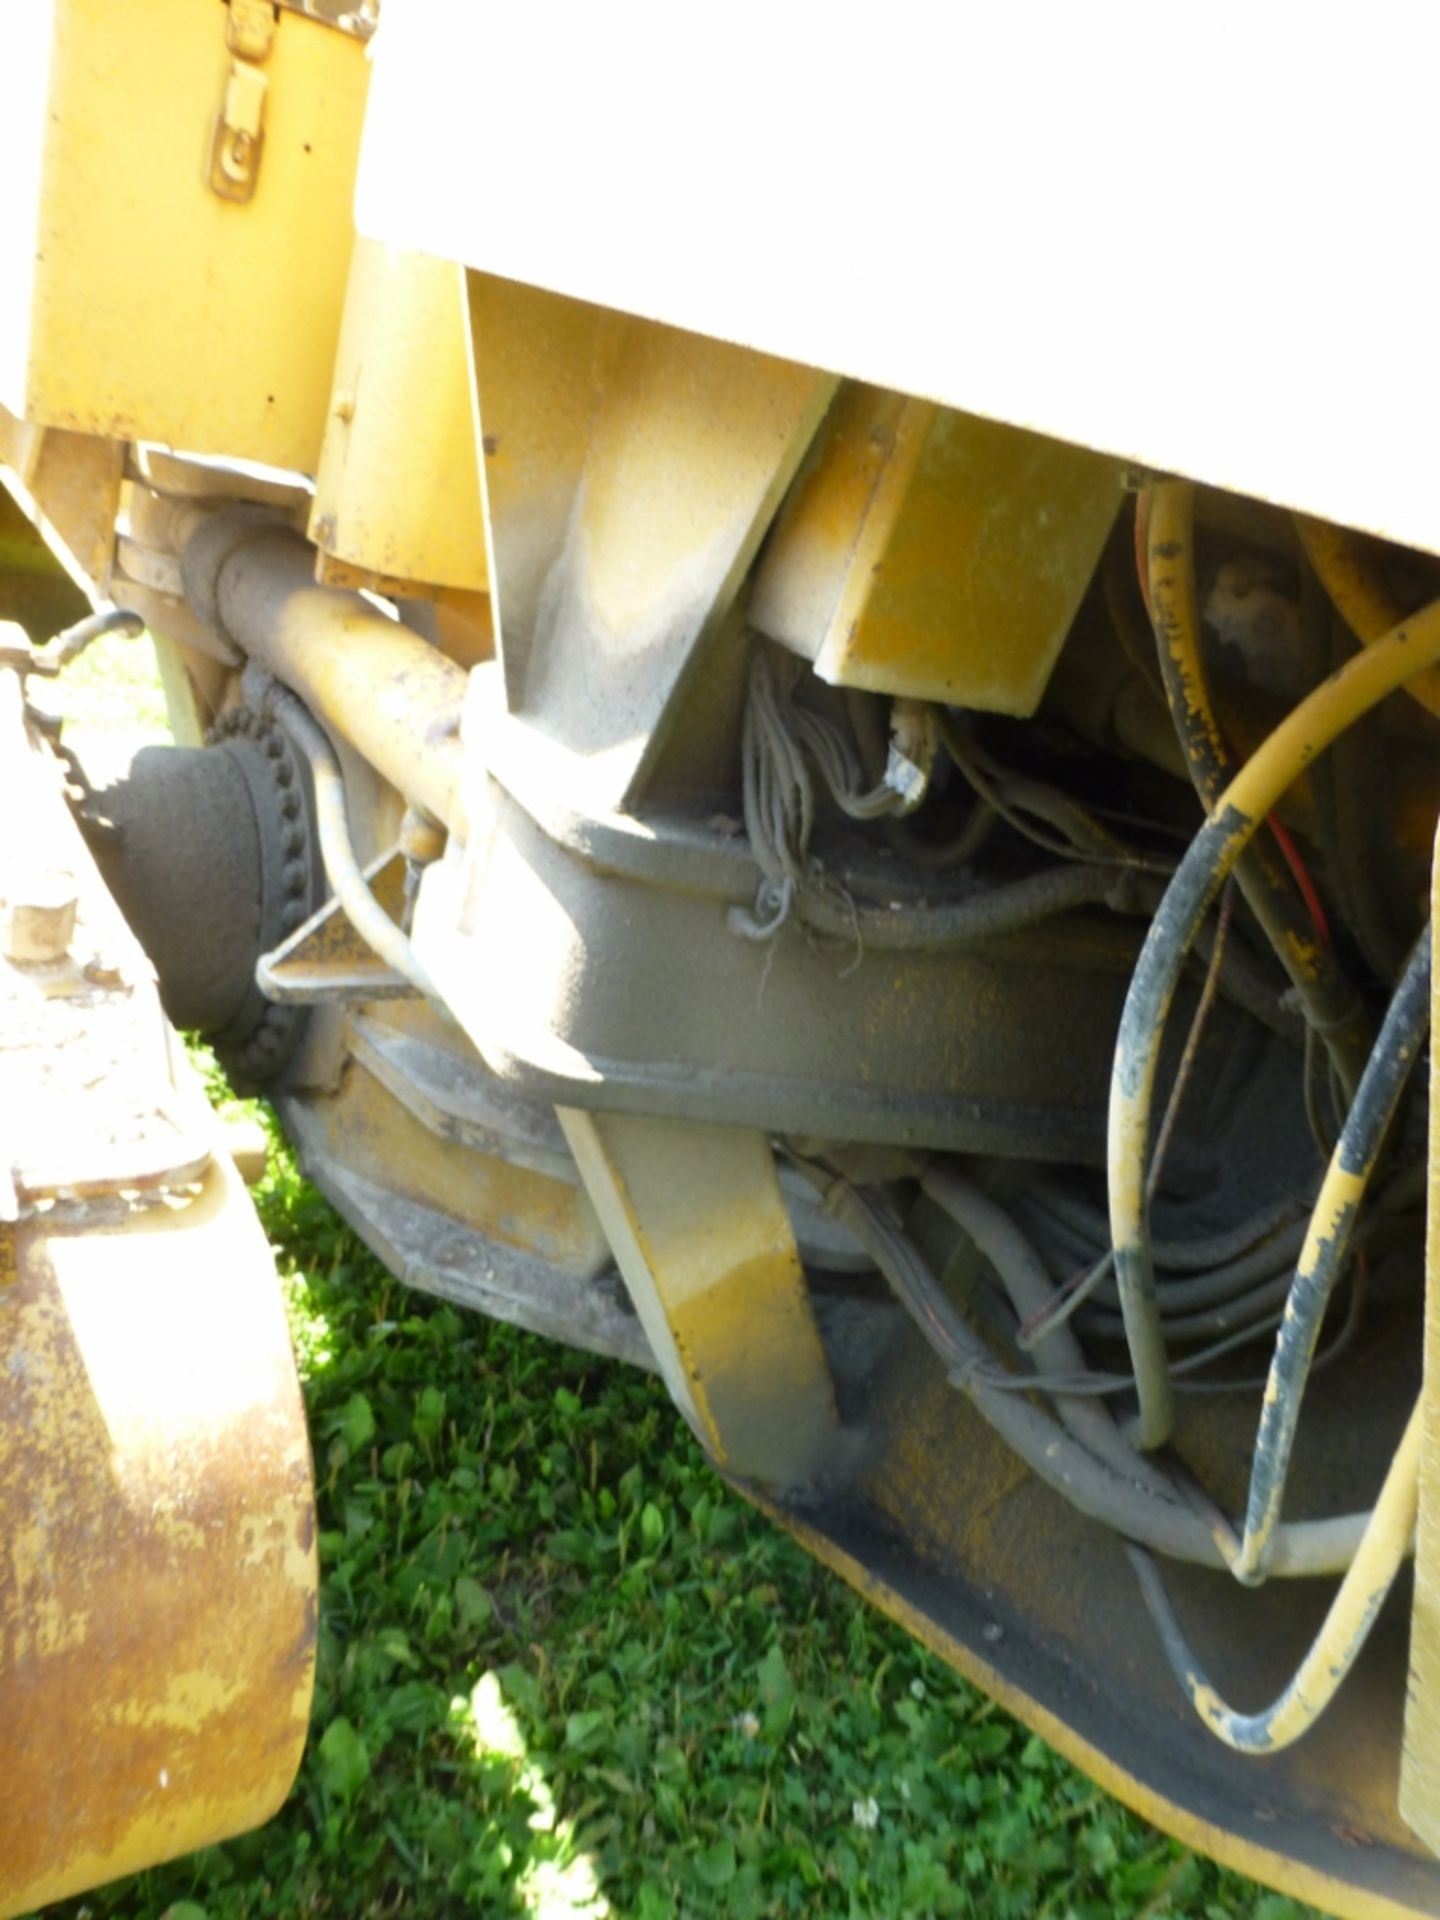 Caterpillar 120G motor grader with 13'10" moldboard se:87v871. Power shift. 7720 unverified hrs. - Image 9 of 27